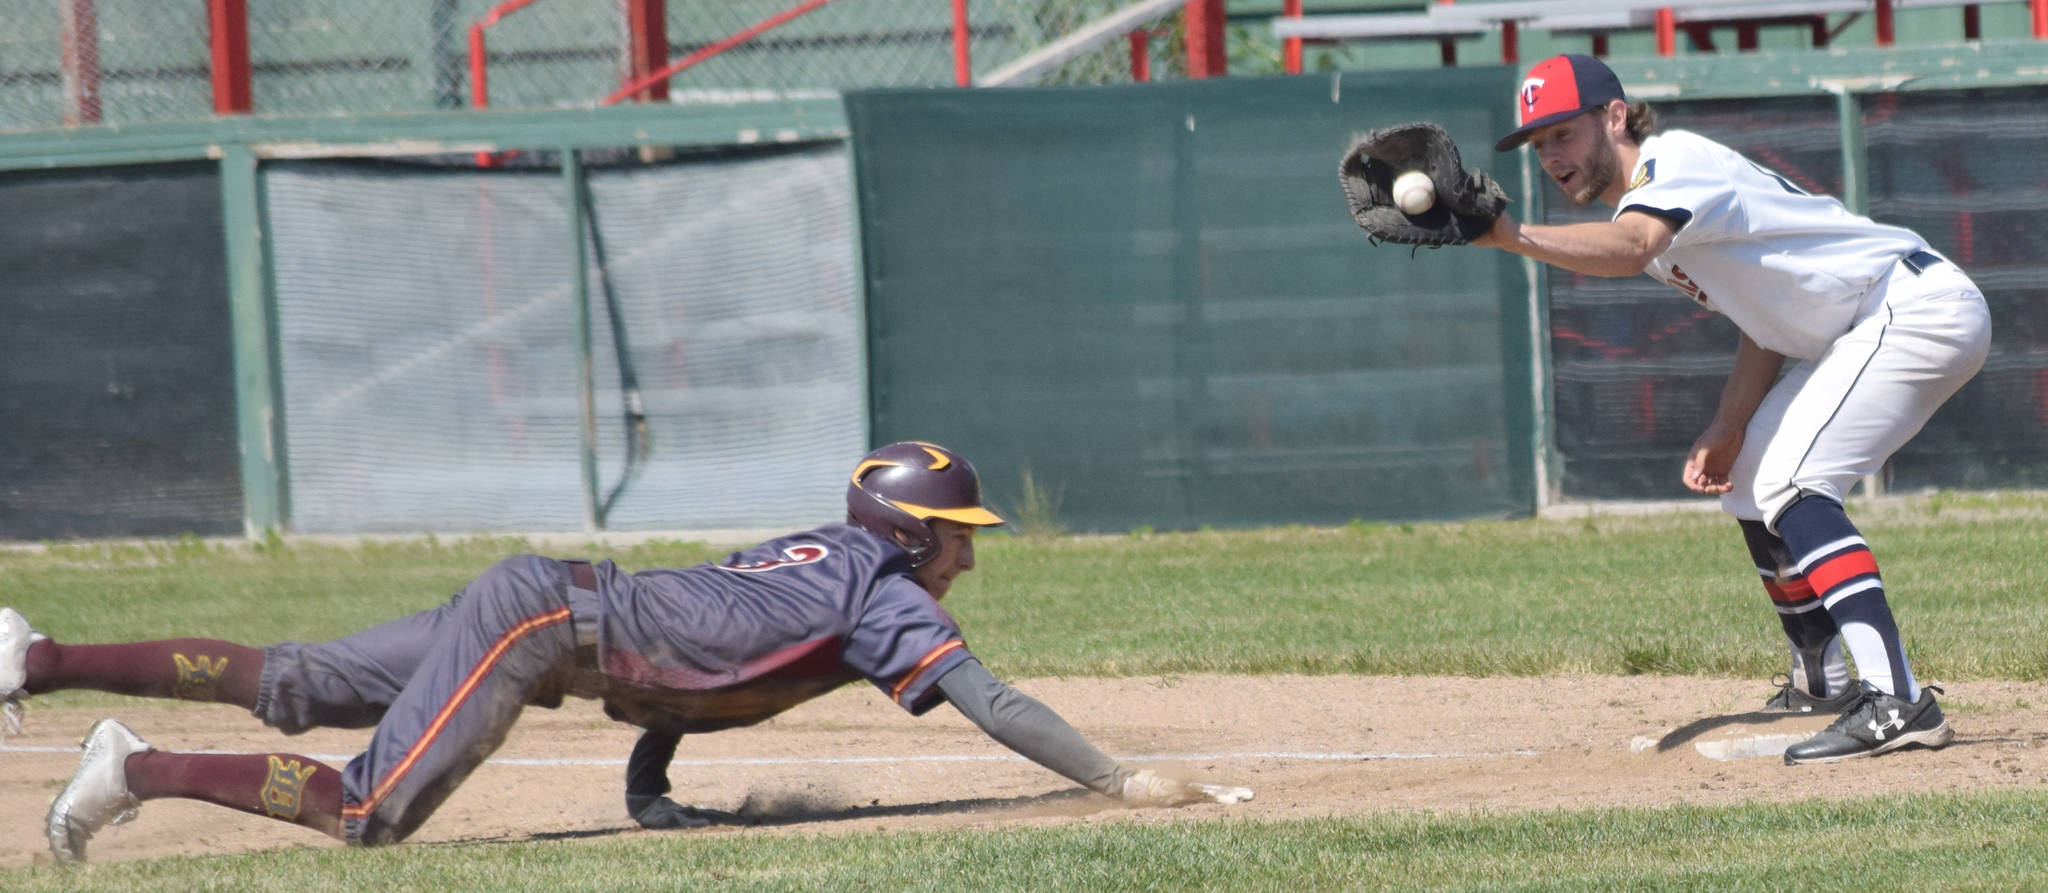 Alex Bruce of Dimond is picked off first base, with Post 20 Twins’ Seth Adkins providing the tag, on Sunday, June 23, 2019, at Coral Seymour Memorial Park in Kenai, Alaska. (Photo by Jeff Helminiak/Peninsula Clarion)